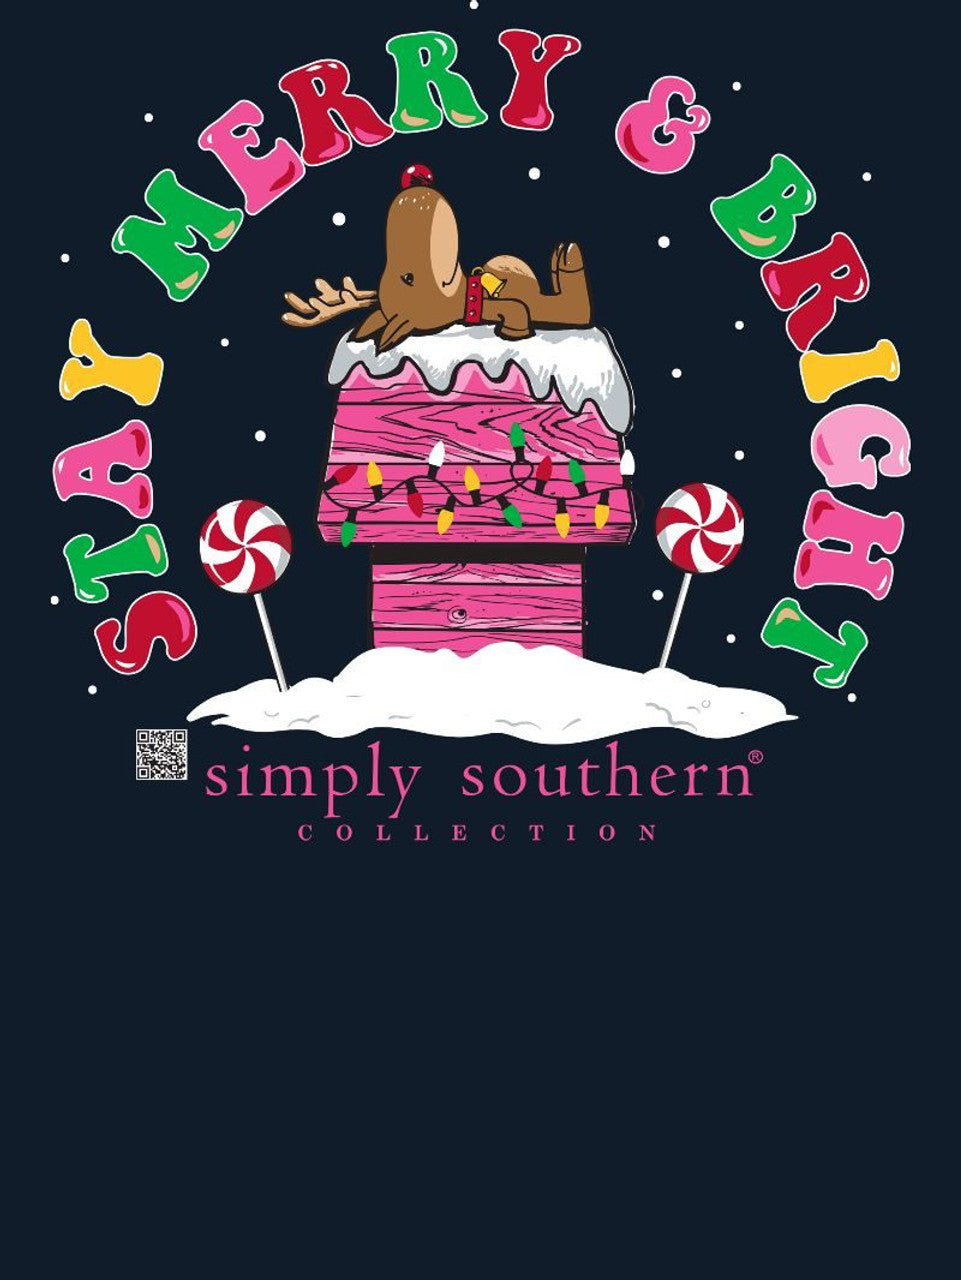 FINAL SALE - YOUTH - Simply Southern - Stay Merry & Bright Long Sleeve Tee